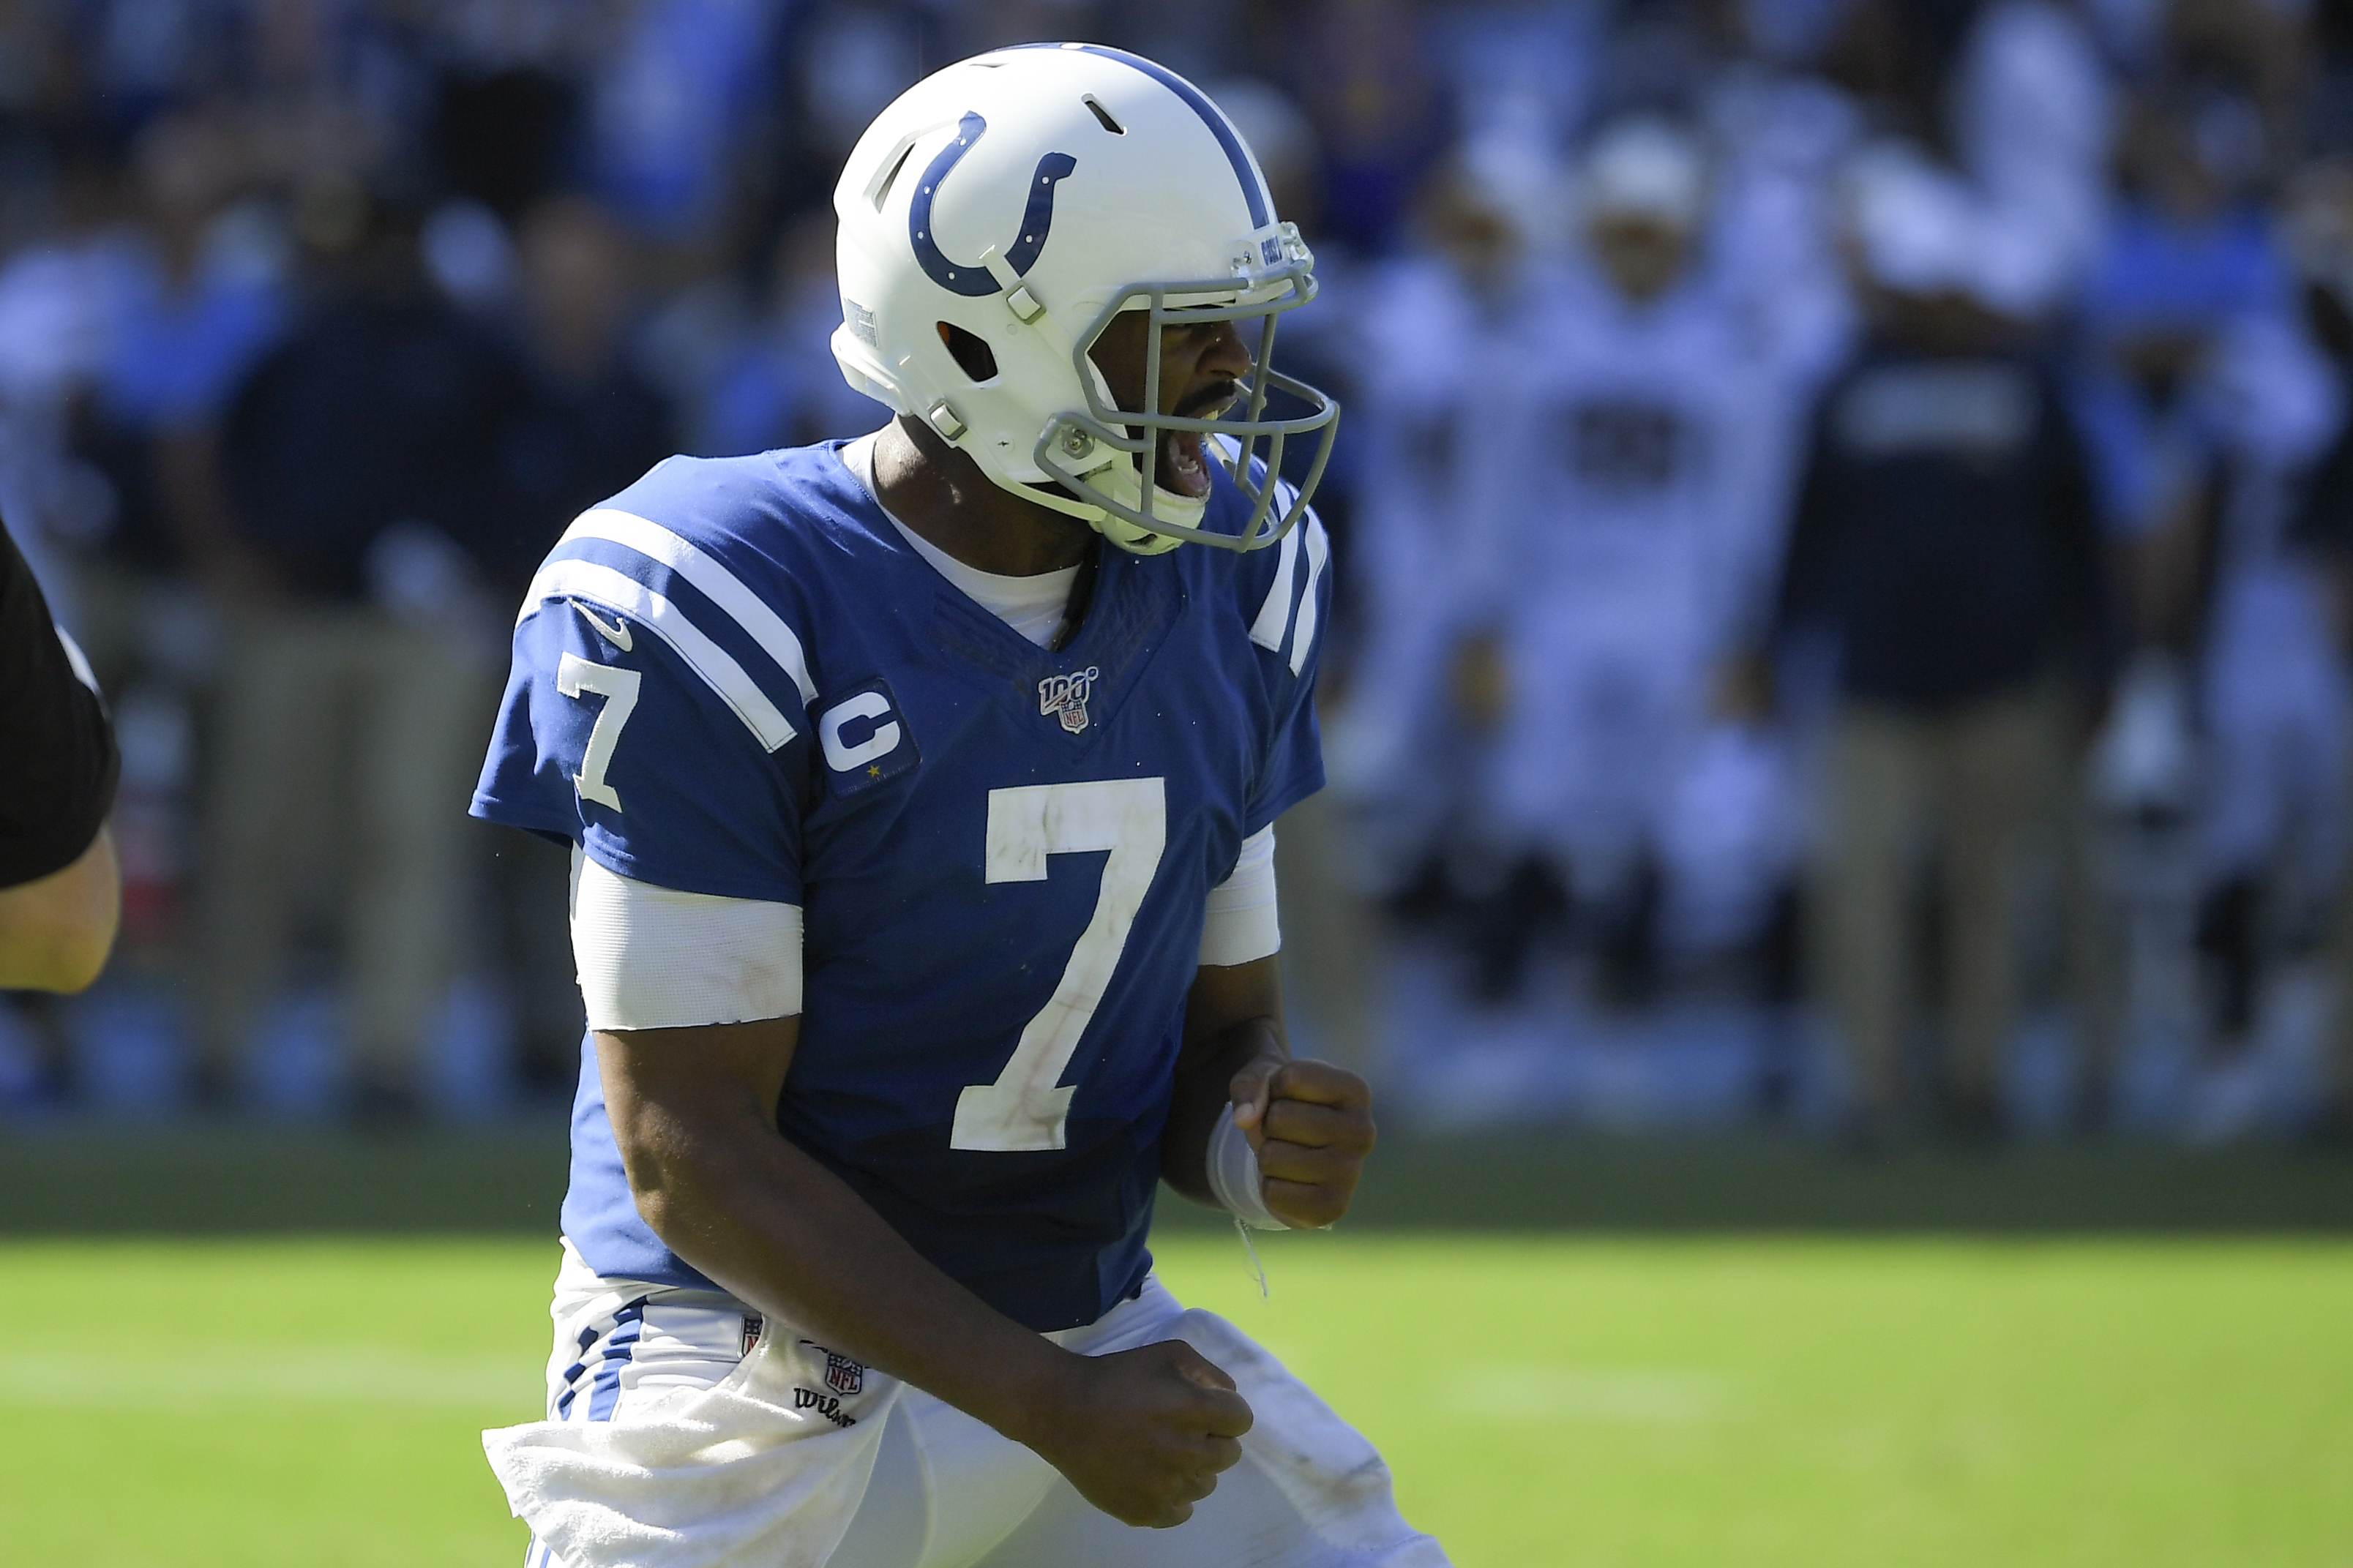 No Luck necessary: QB Jacoby Brissett stellar in Colts' loss